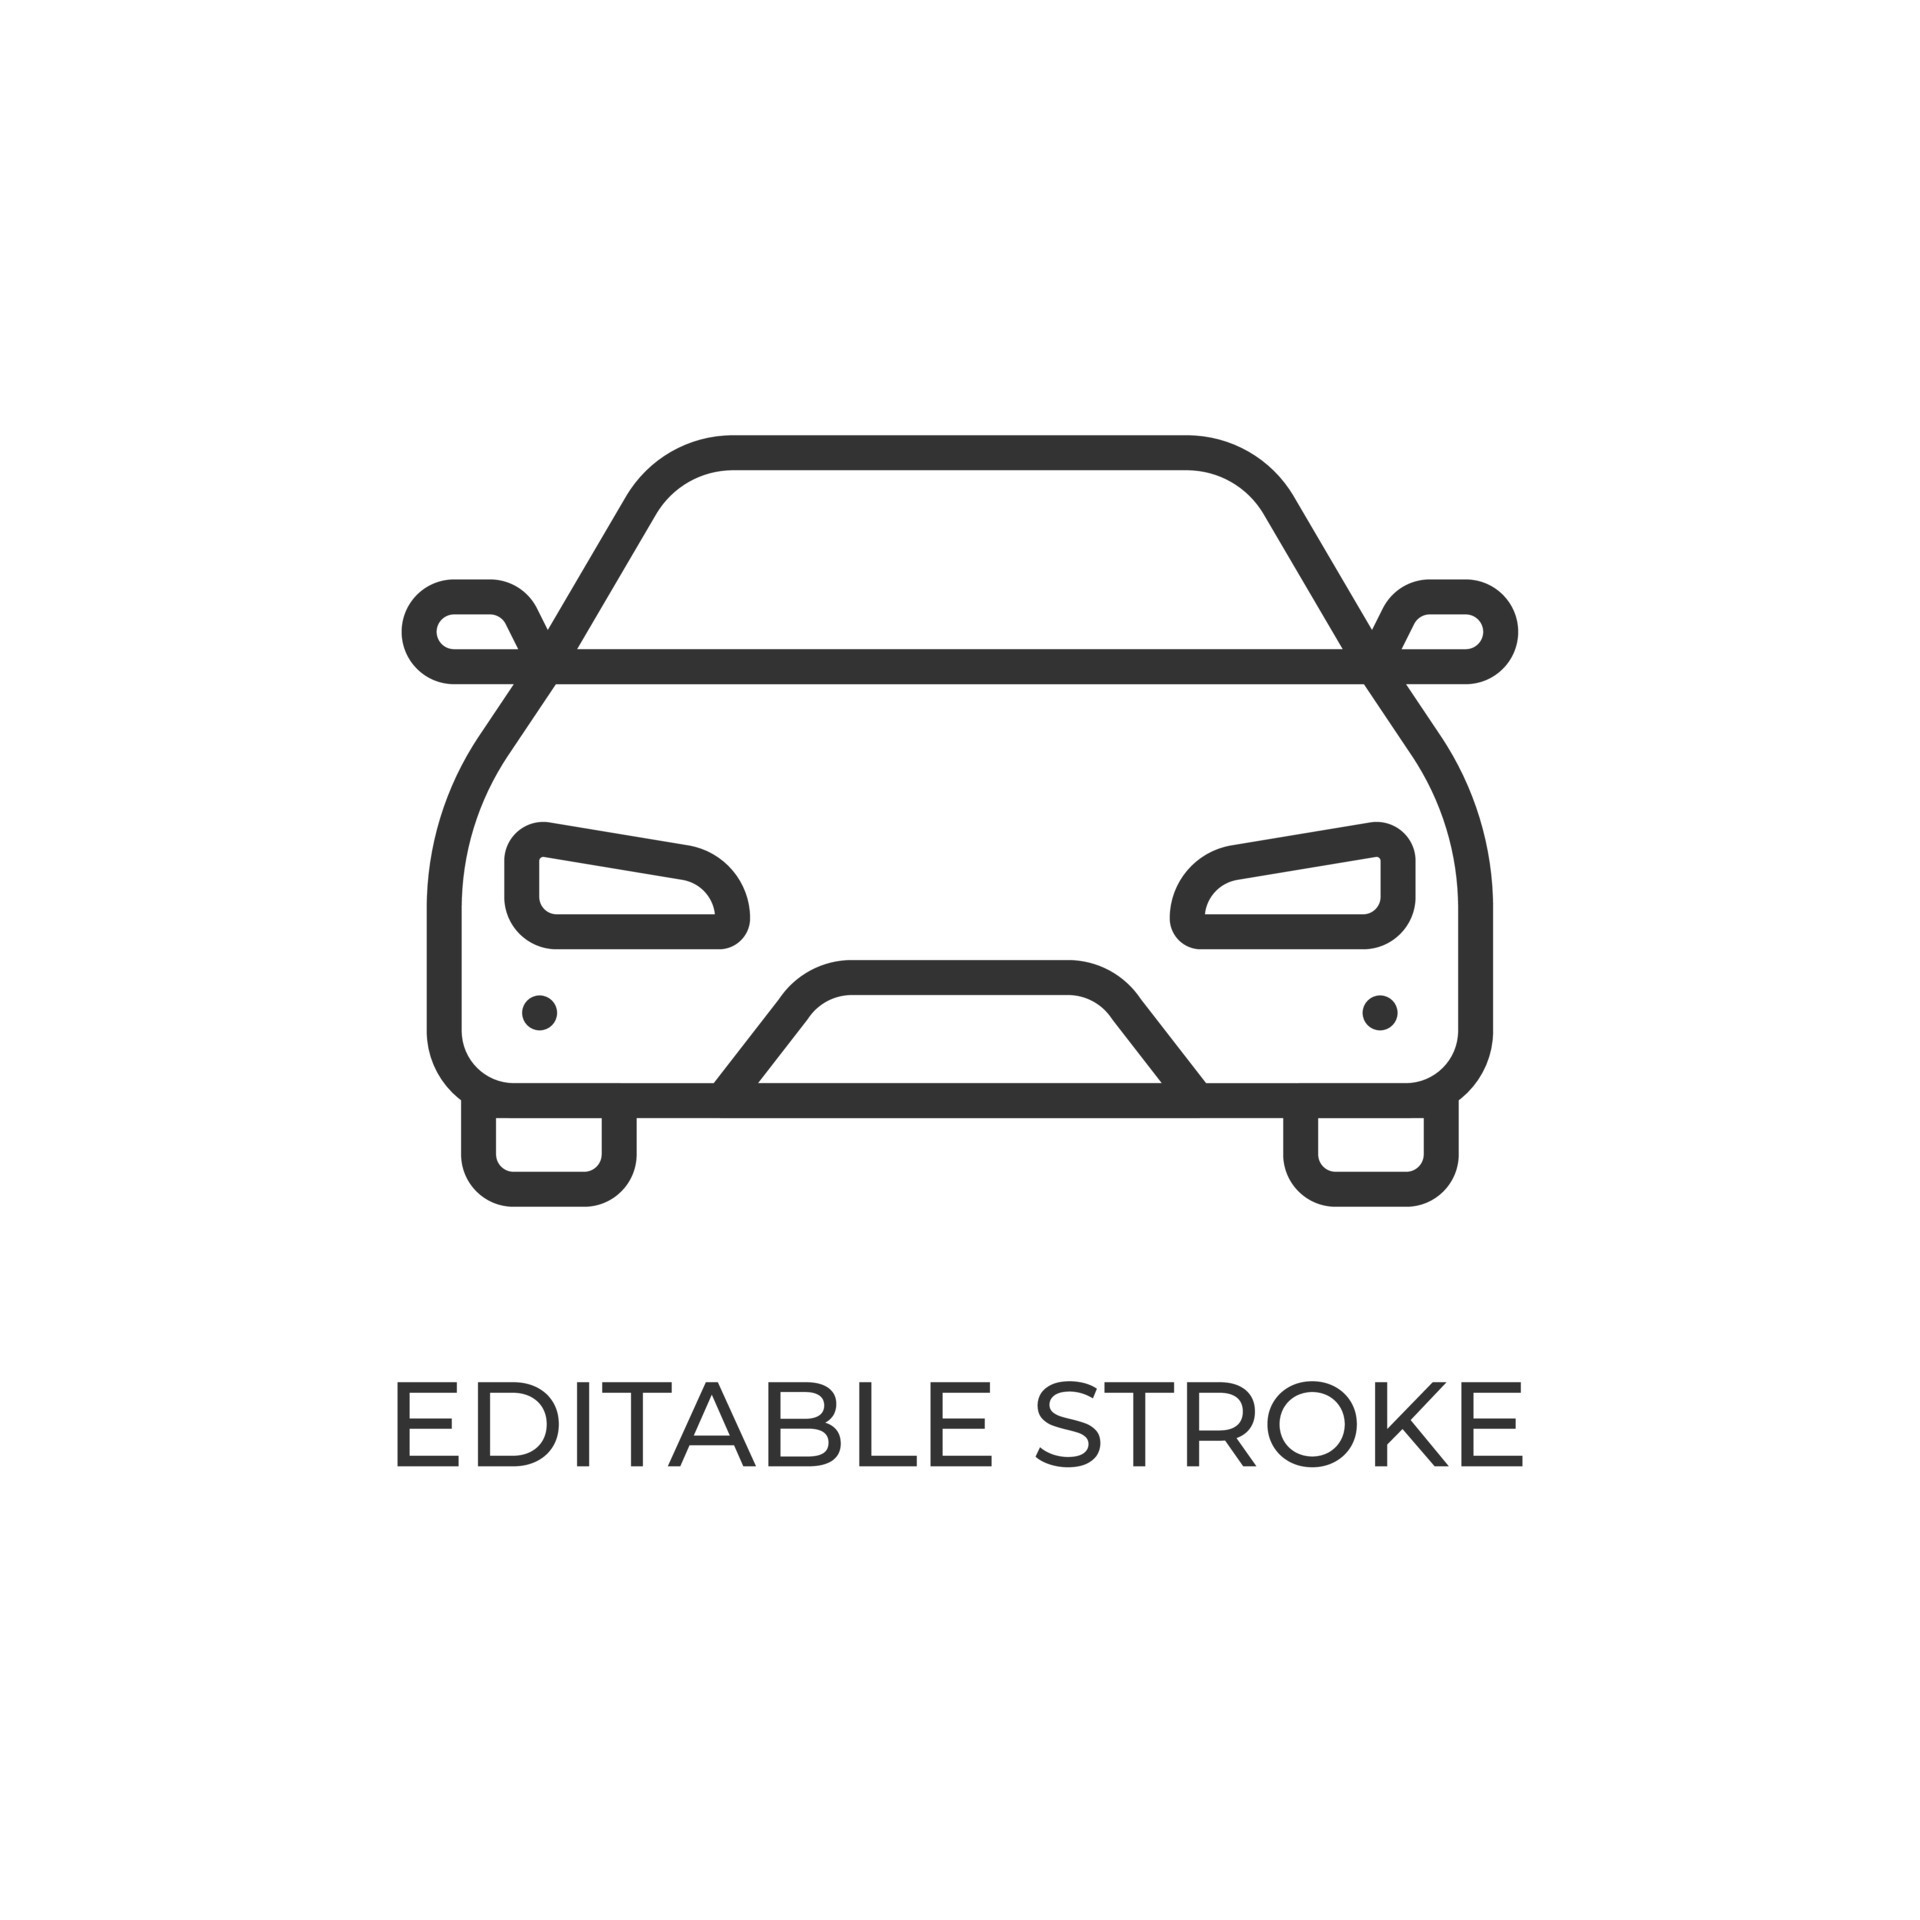 Stacked travelling cars frontal view icon